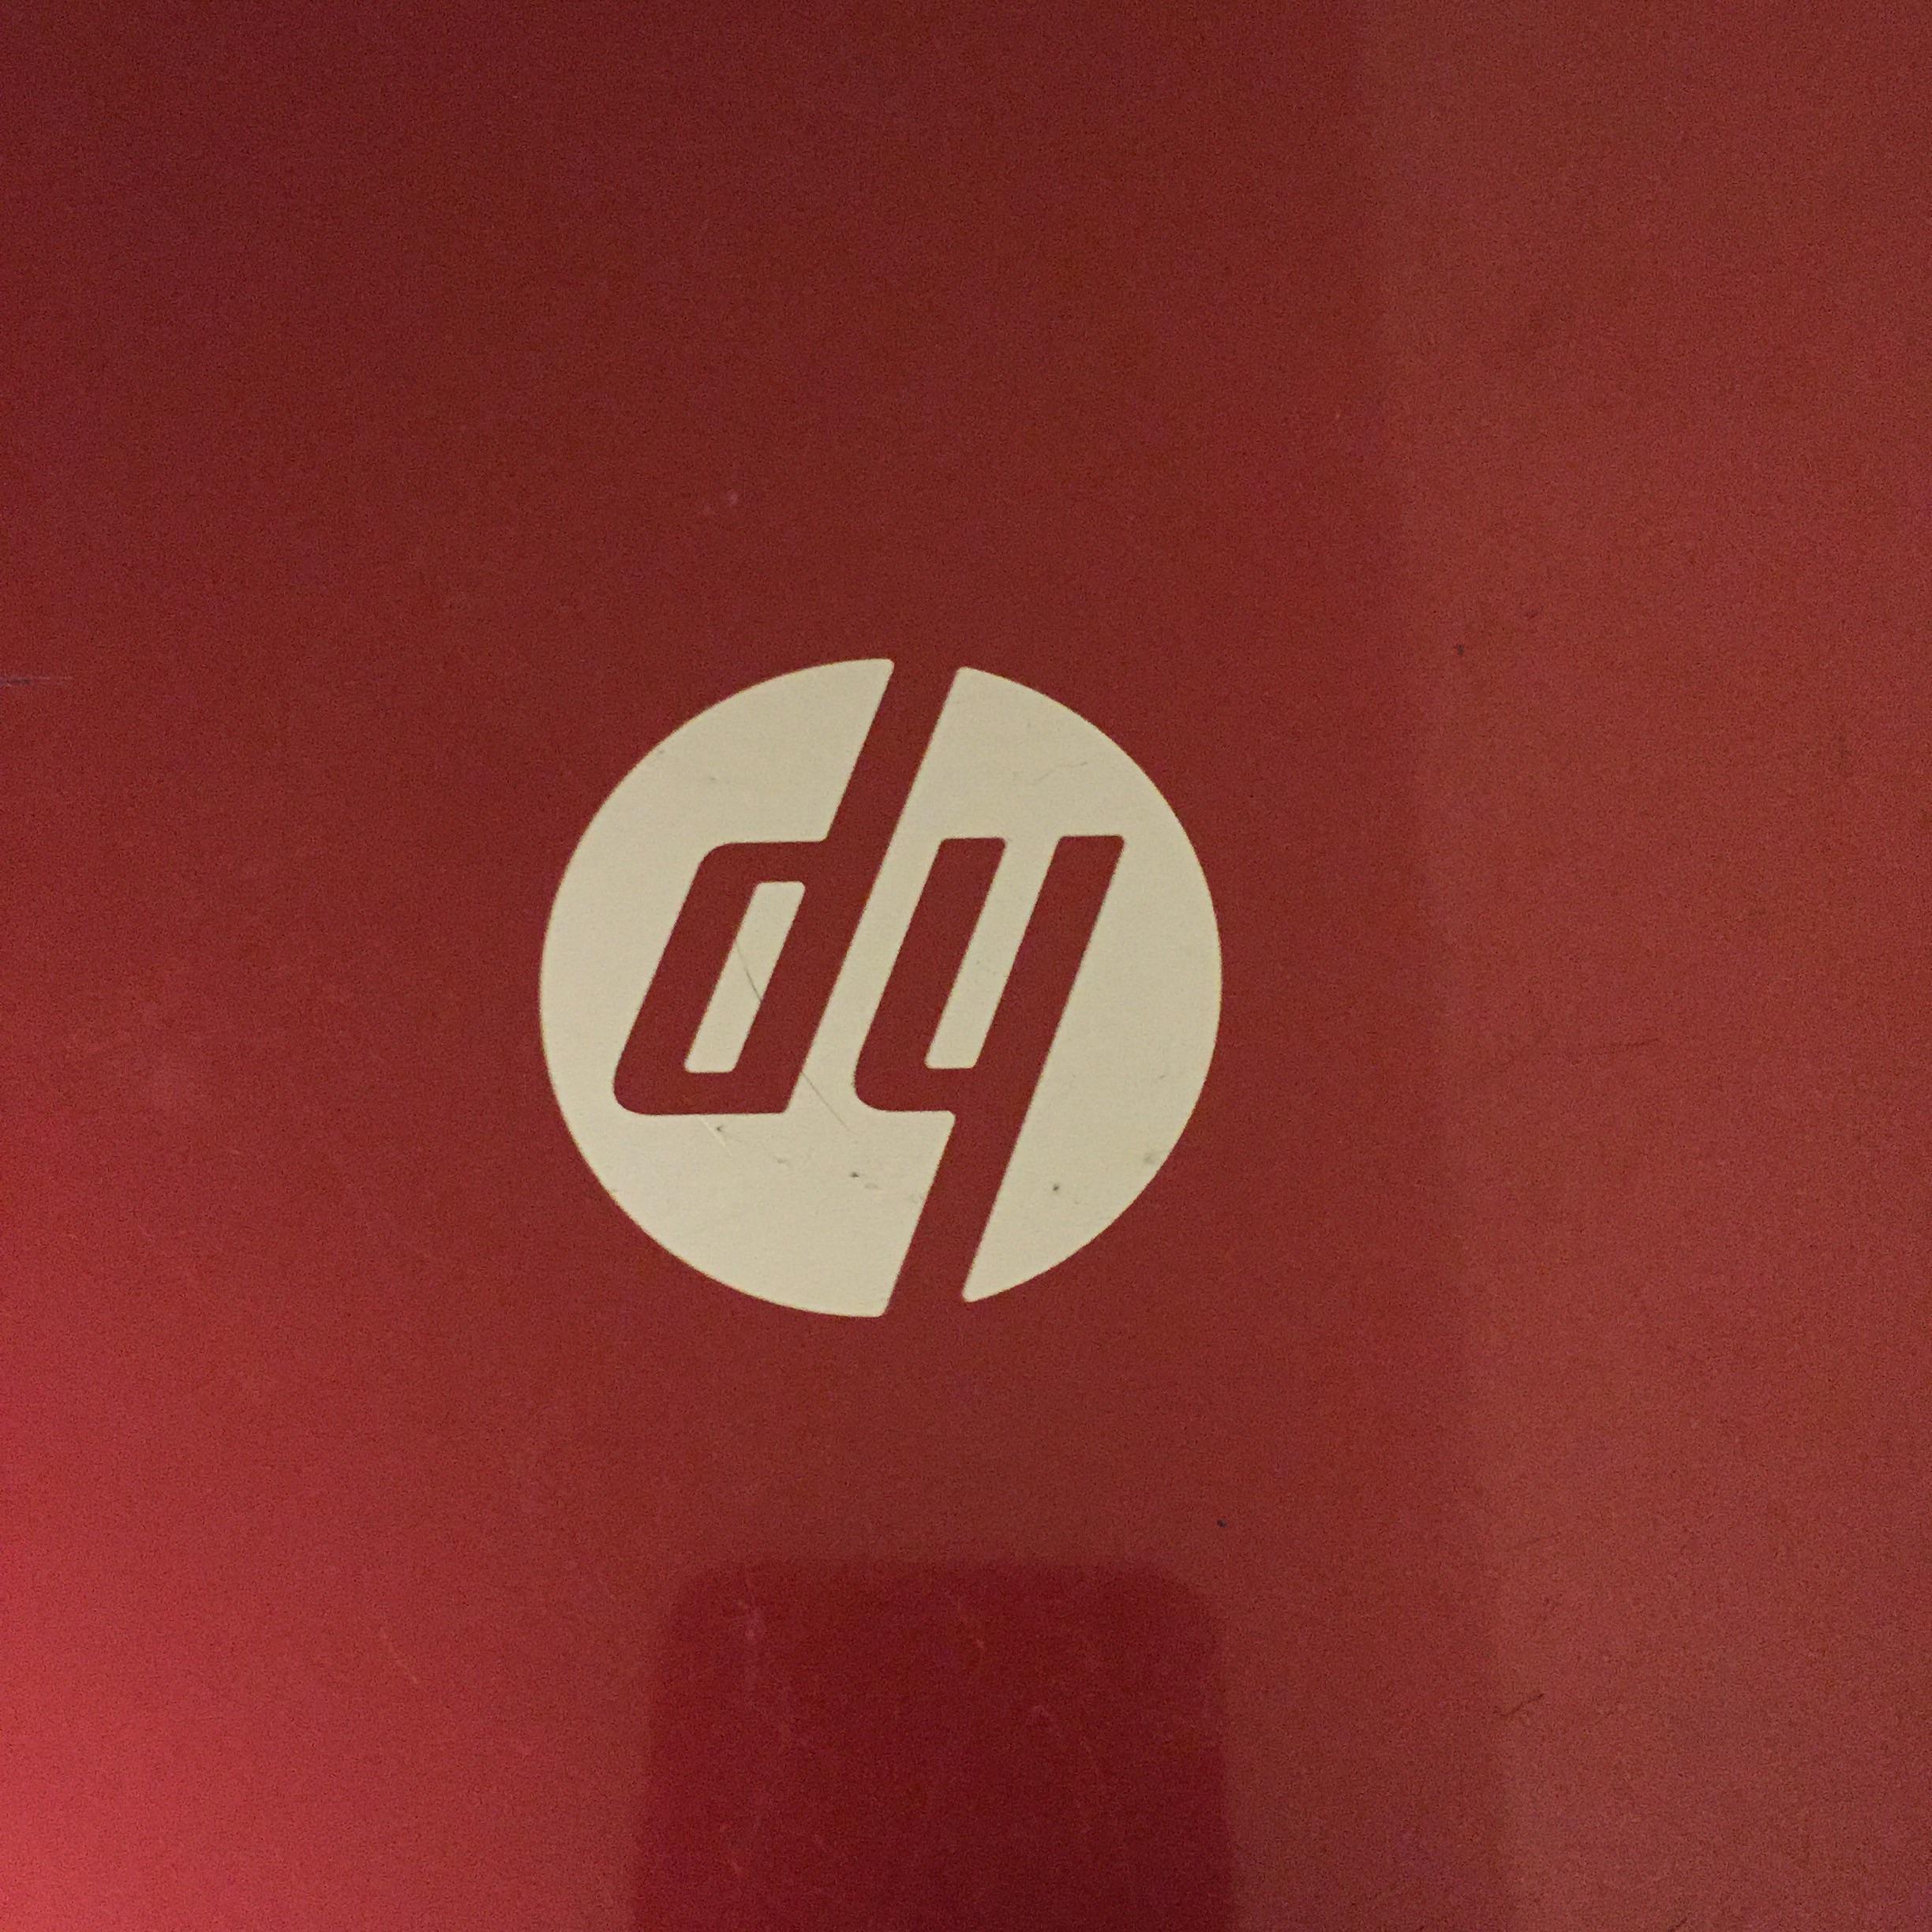 Red HP Logo - Just noticed the HP logo upside down turns into D4